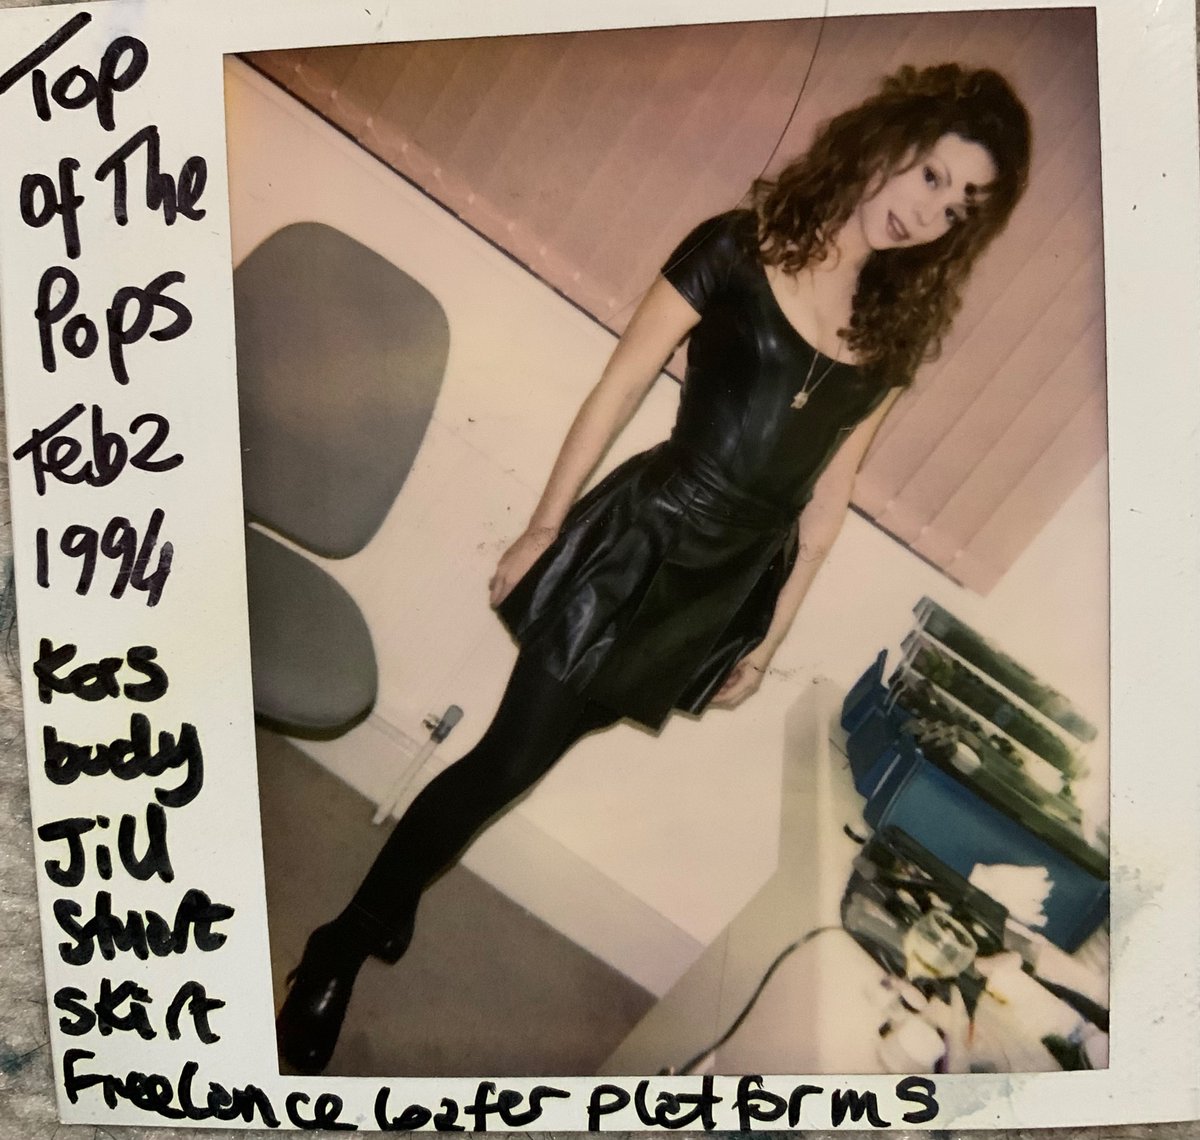 1 more for #Lambs. found lonely at the bottom of a box… usual crew; #styled & #Polaroid by me,#m/u #BilllyBBrasfield, #hair that took forever (and we got told off for messing around) Syd Currie. Pls credit if reposting.